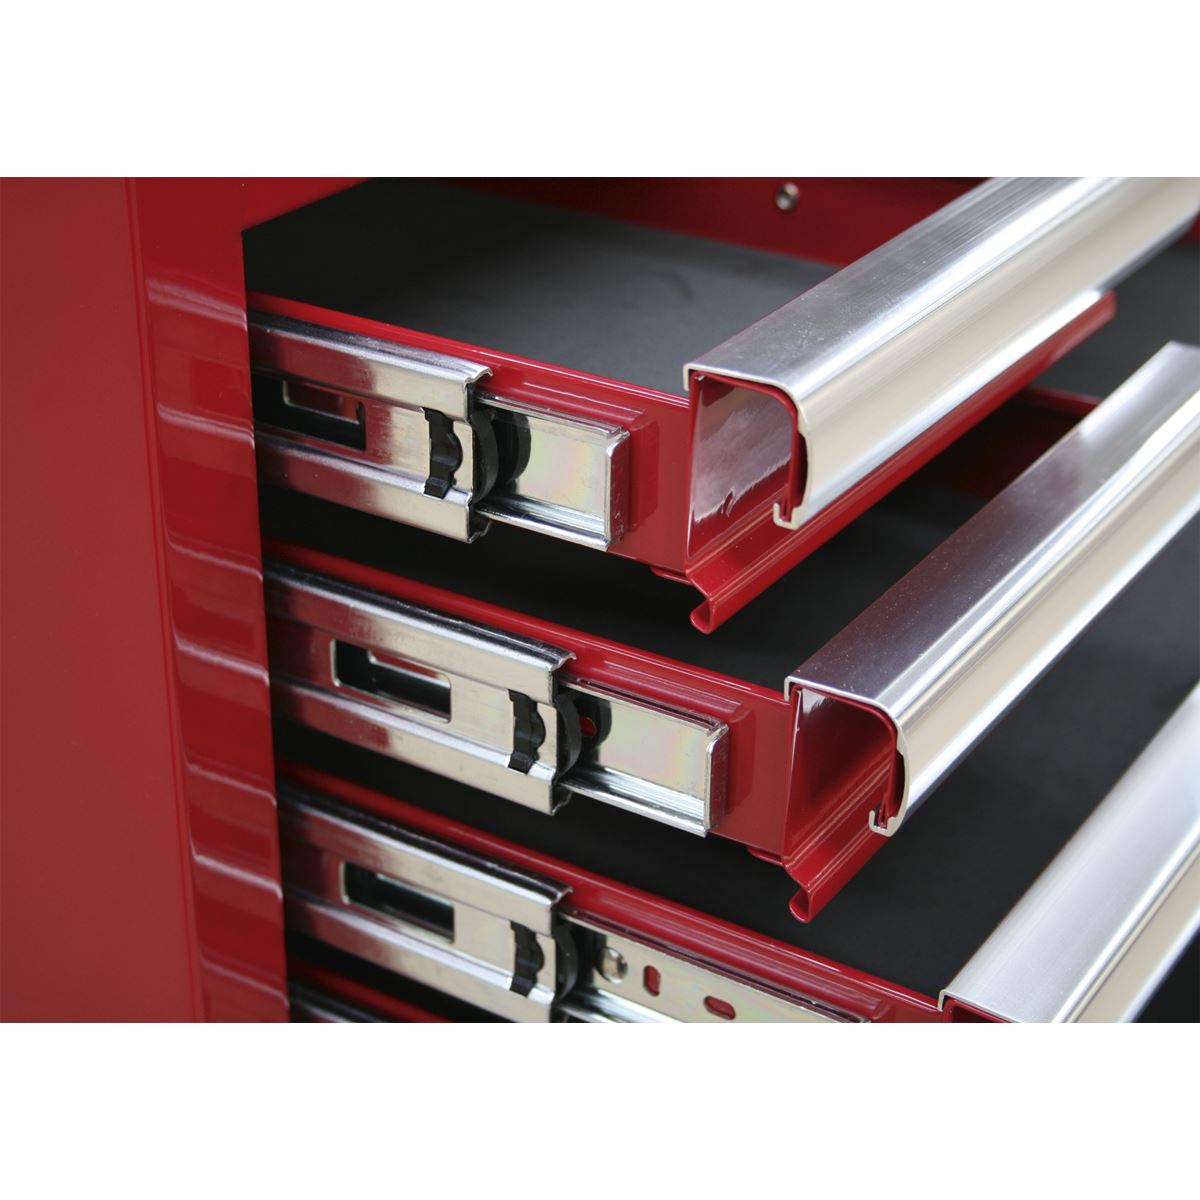 Sealey Superline Pro Mid-Box Tool Chest 1 Drawer with Ball-Bearing Slides Heavy-Duty- Red